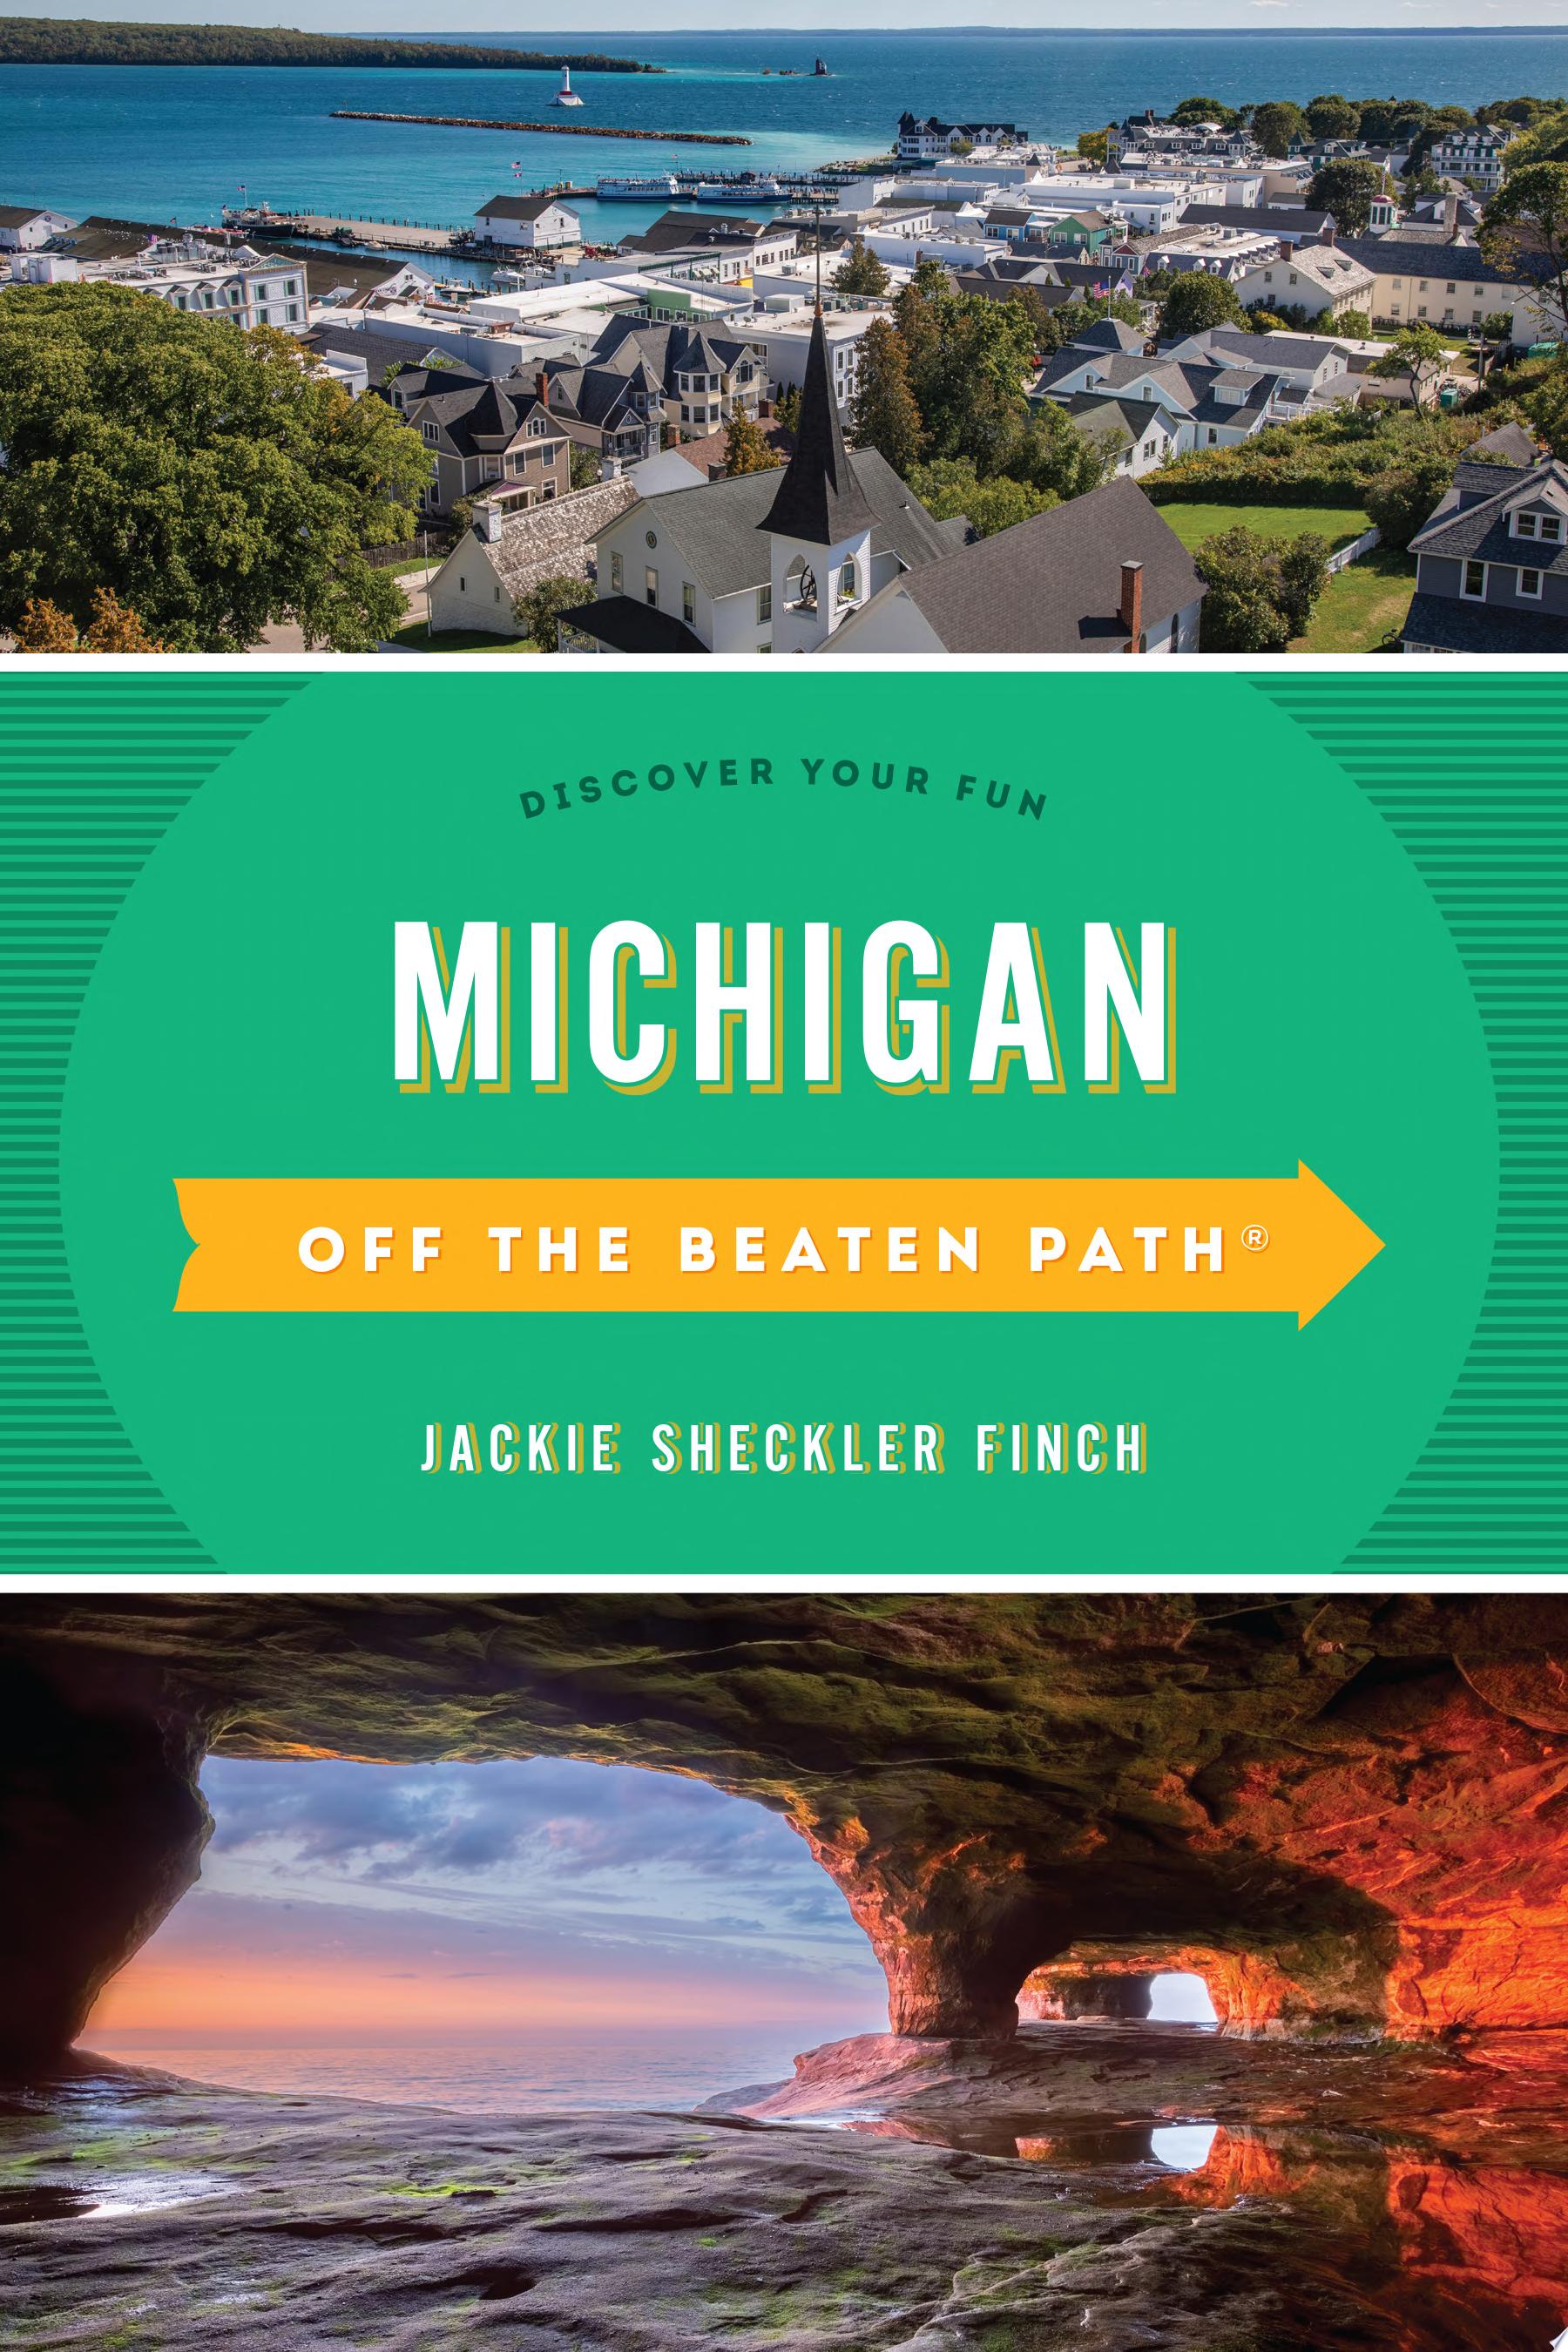 Image for "Michigan Off the Beaten Path®"